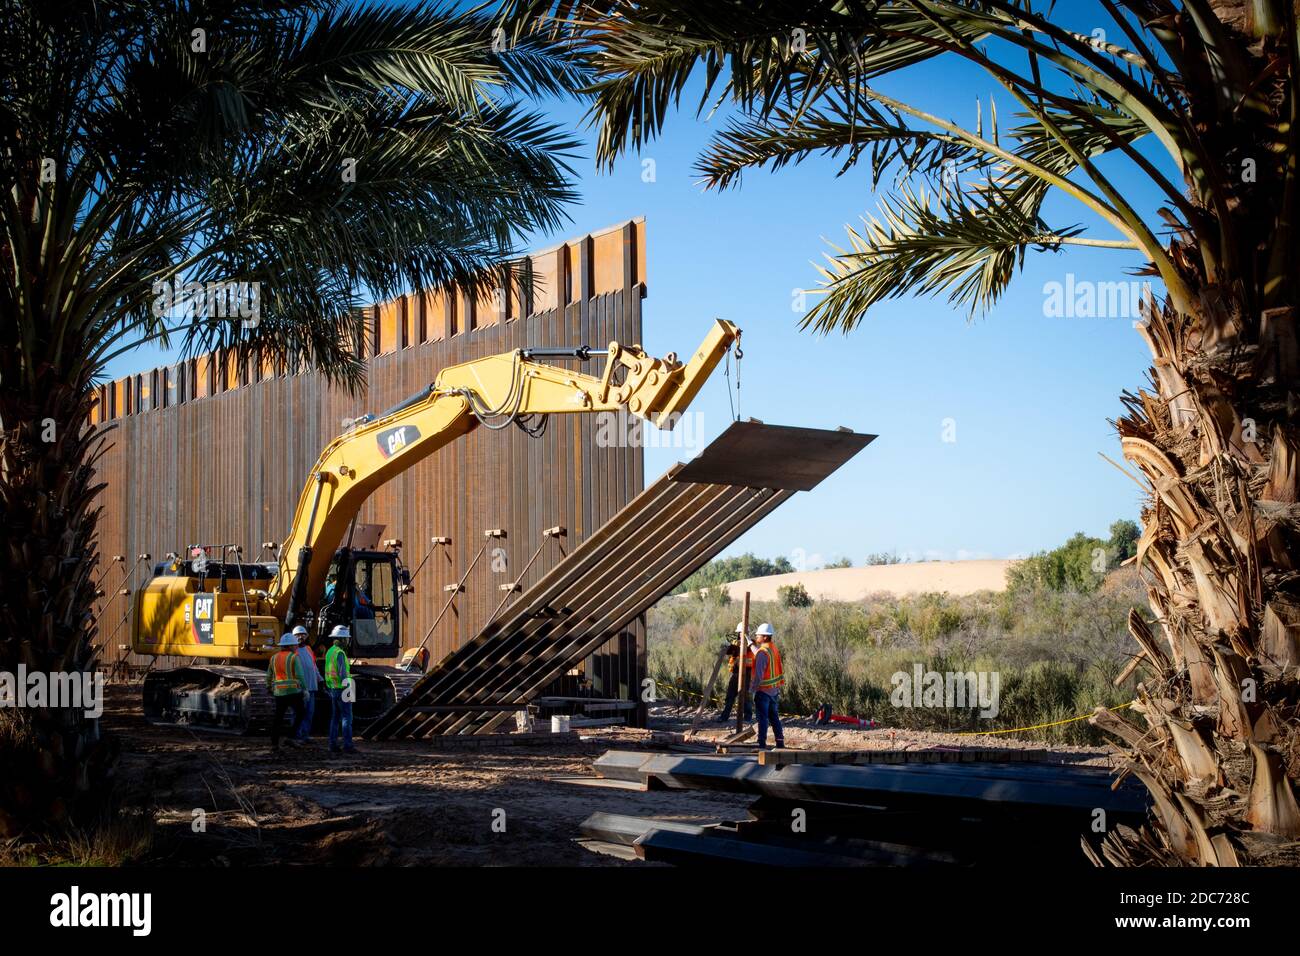 New 30-foot sections of bollard panels are lifted into place at a build site for the Tucson Sector of the U.S. - Mexican border wall, known at the Trump Wall January 9, 2020 near Yuma, Arizona. Stock Photo